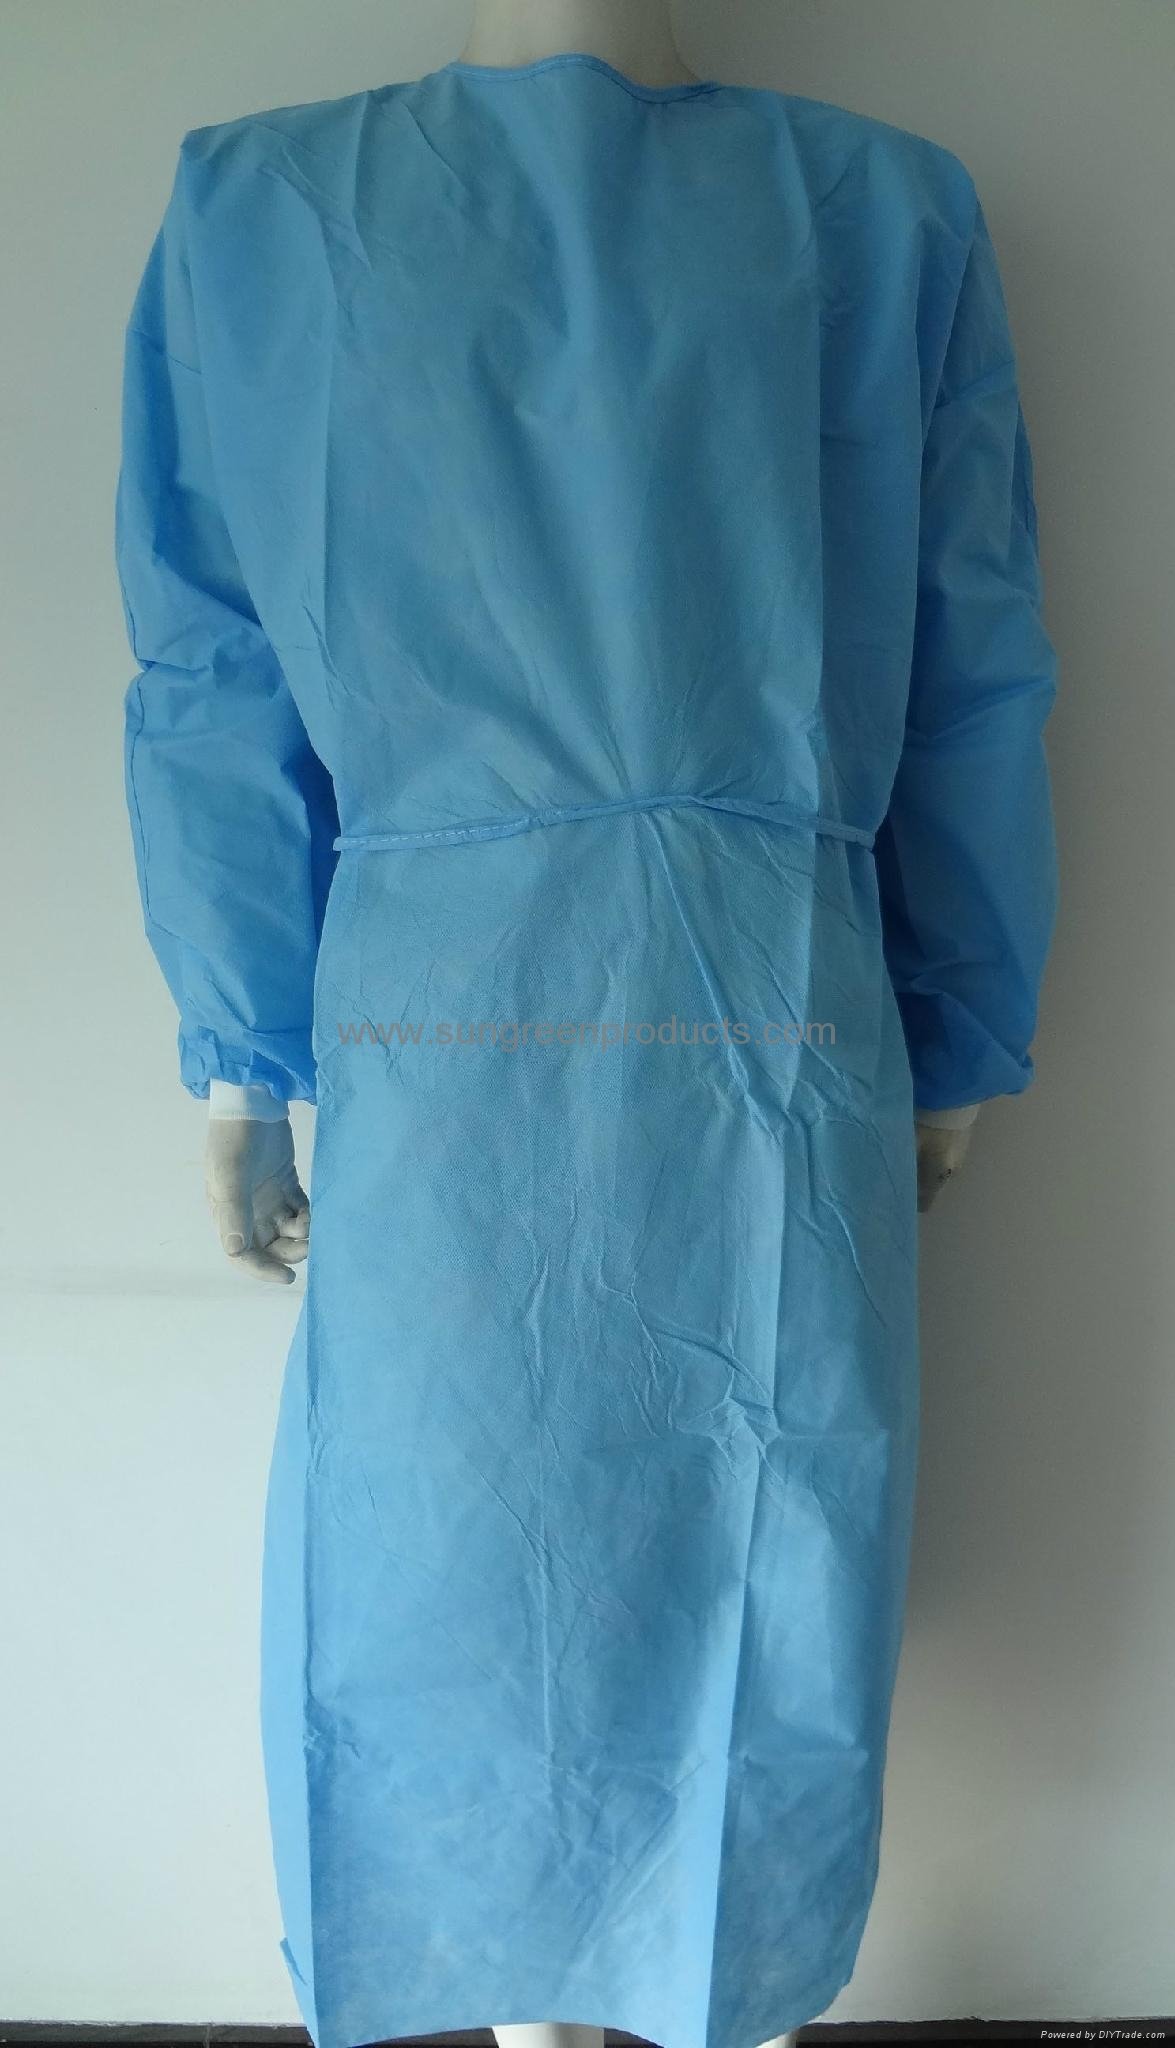 Nonwoven surgical gown,isolation gown